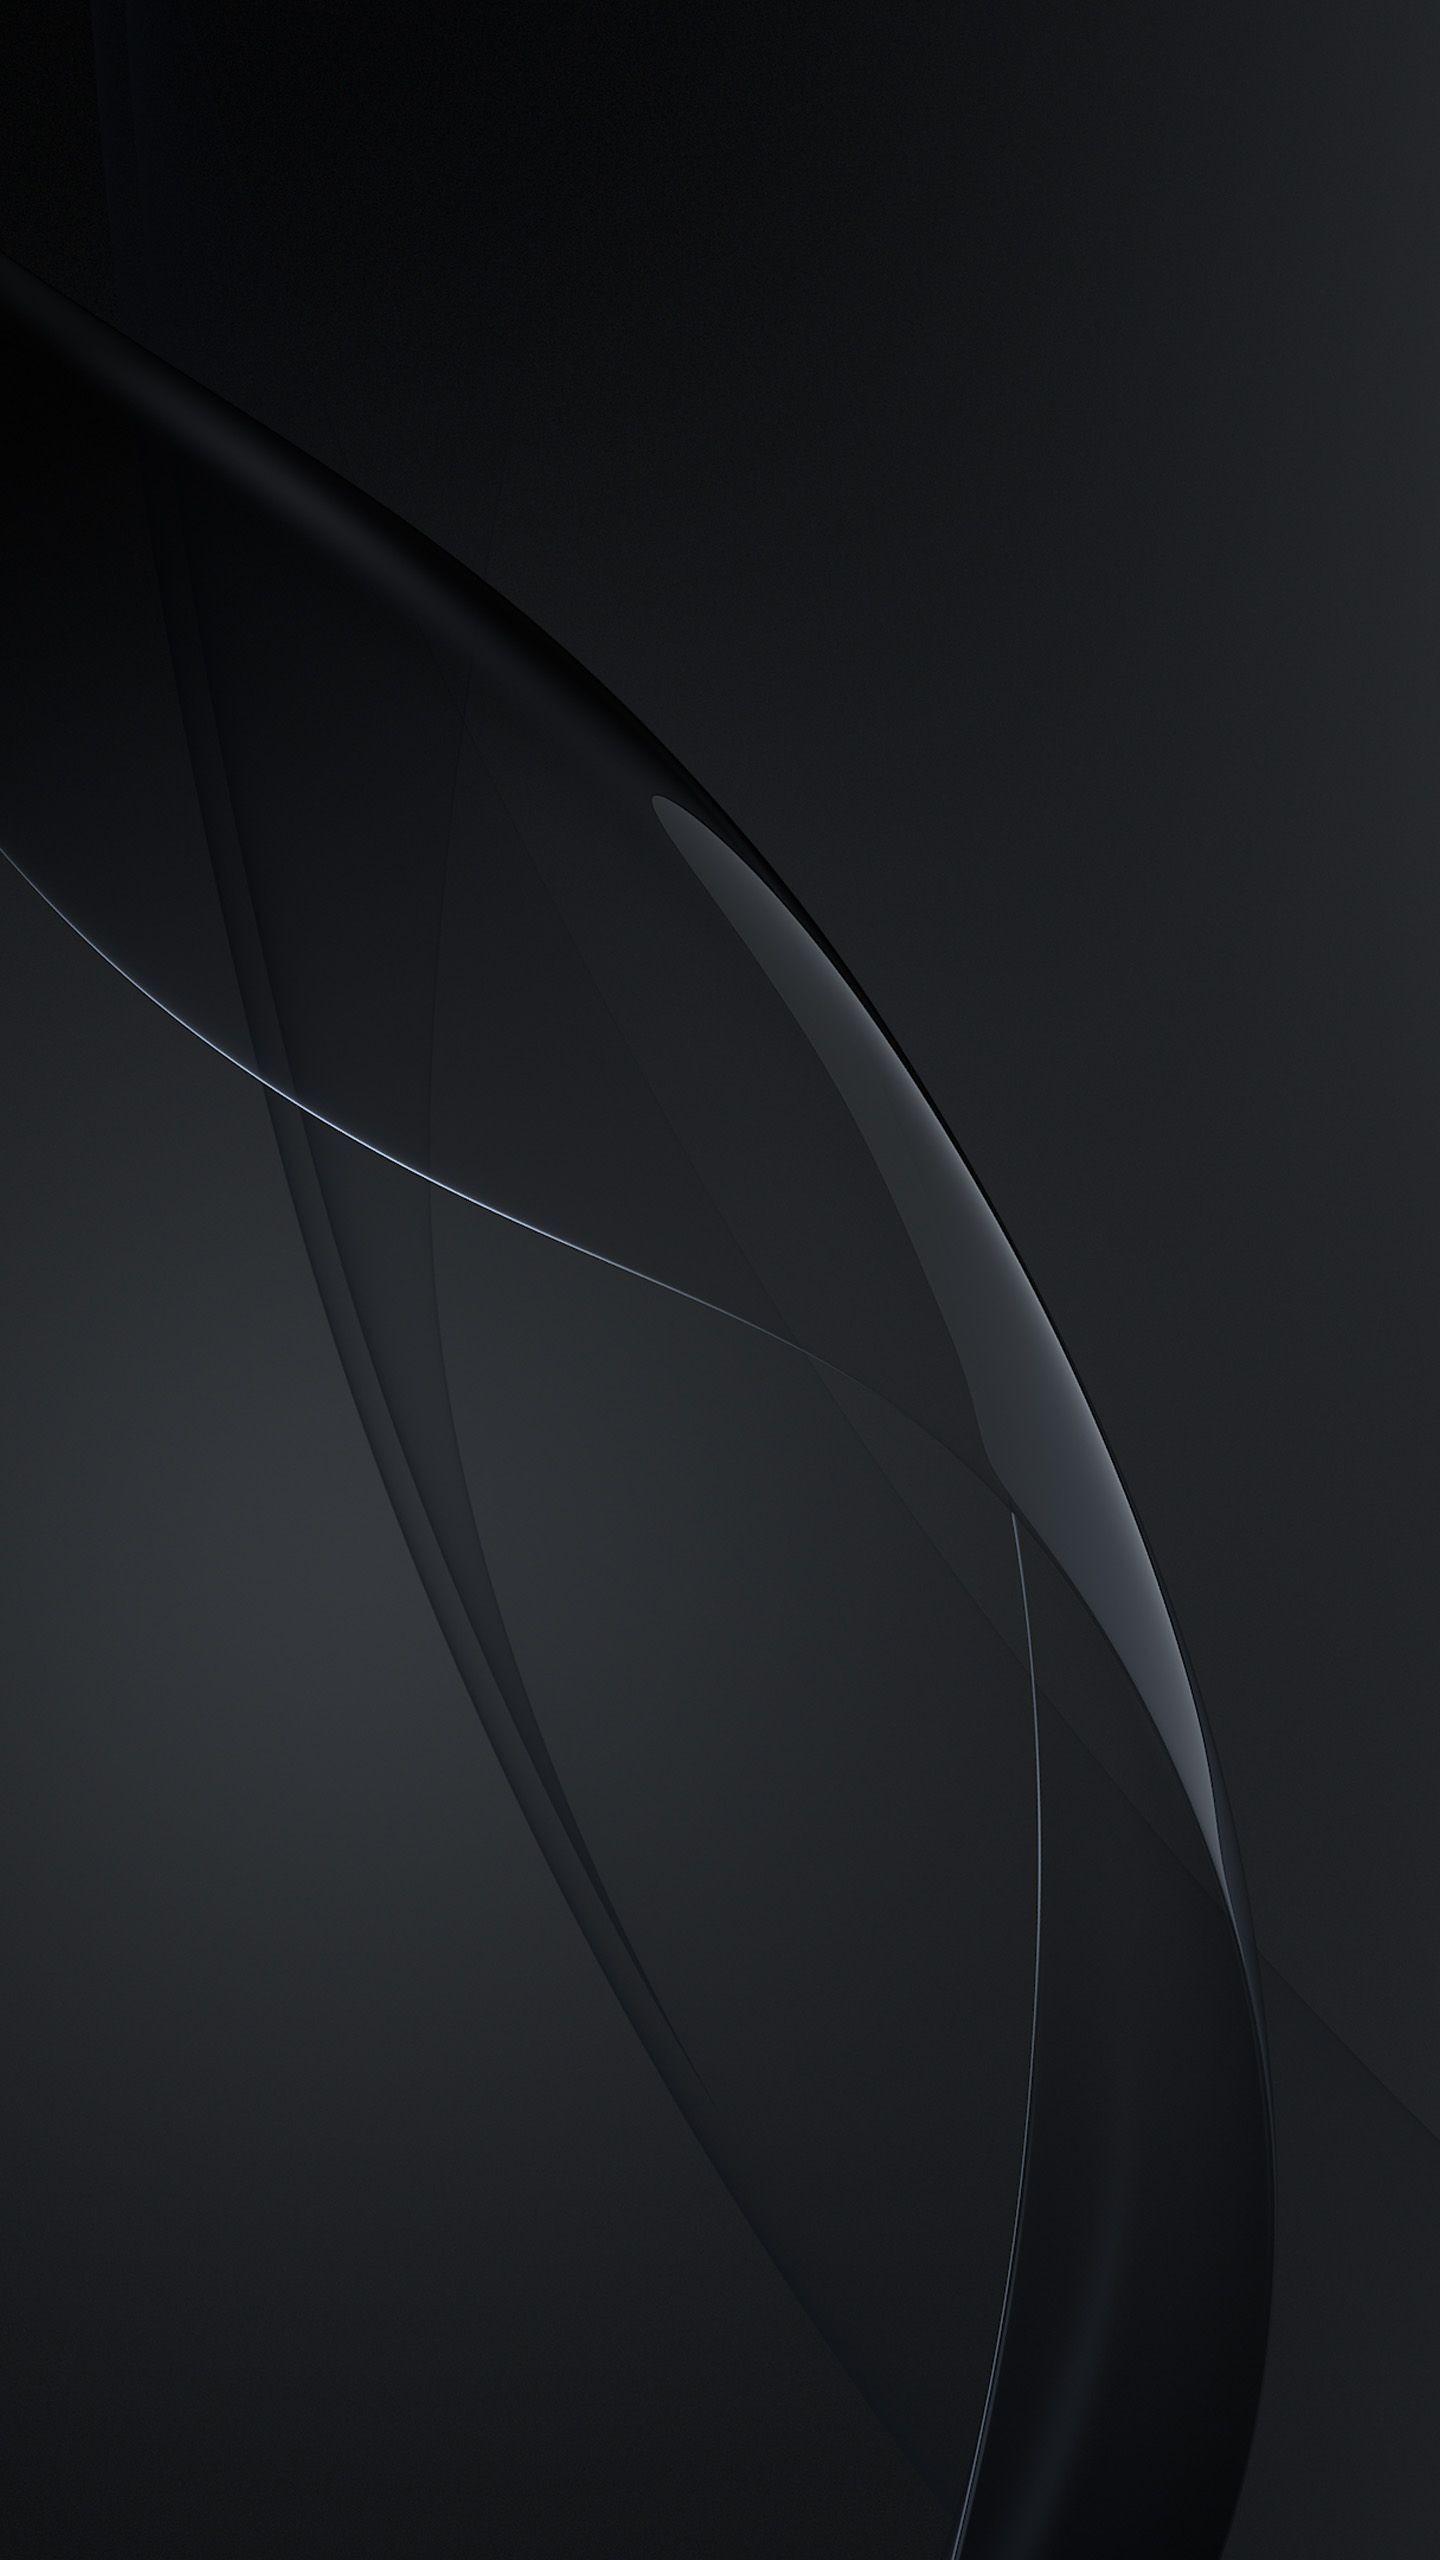 Very Dark Android Wallpapers - Wallpaper Cave 8BD